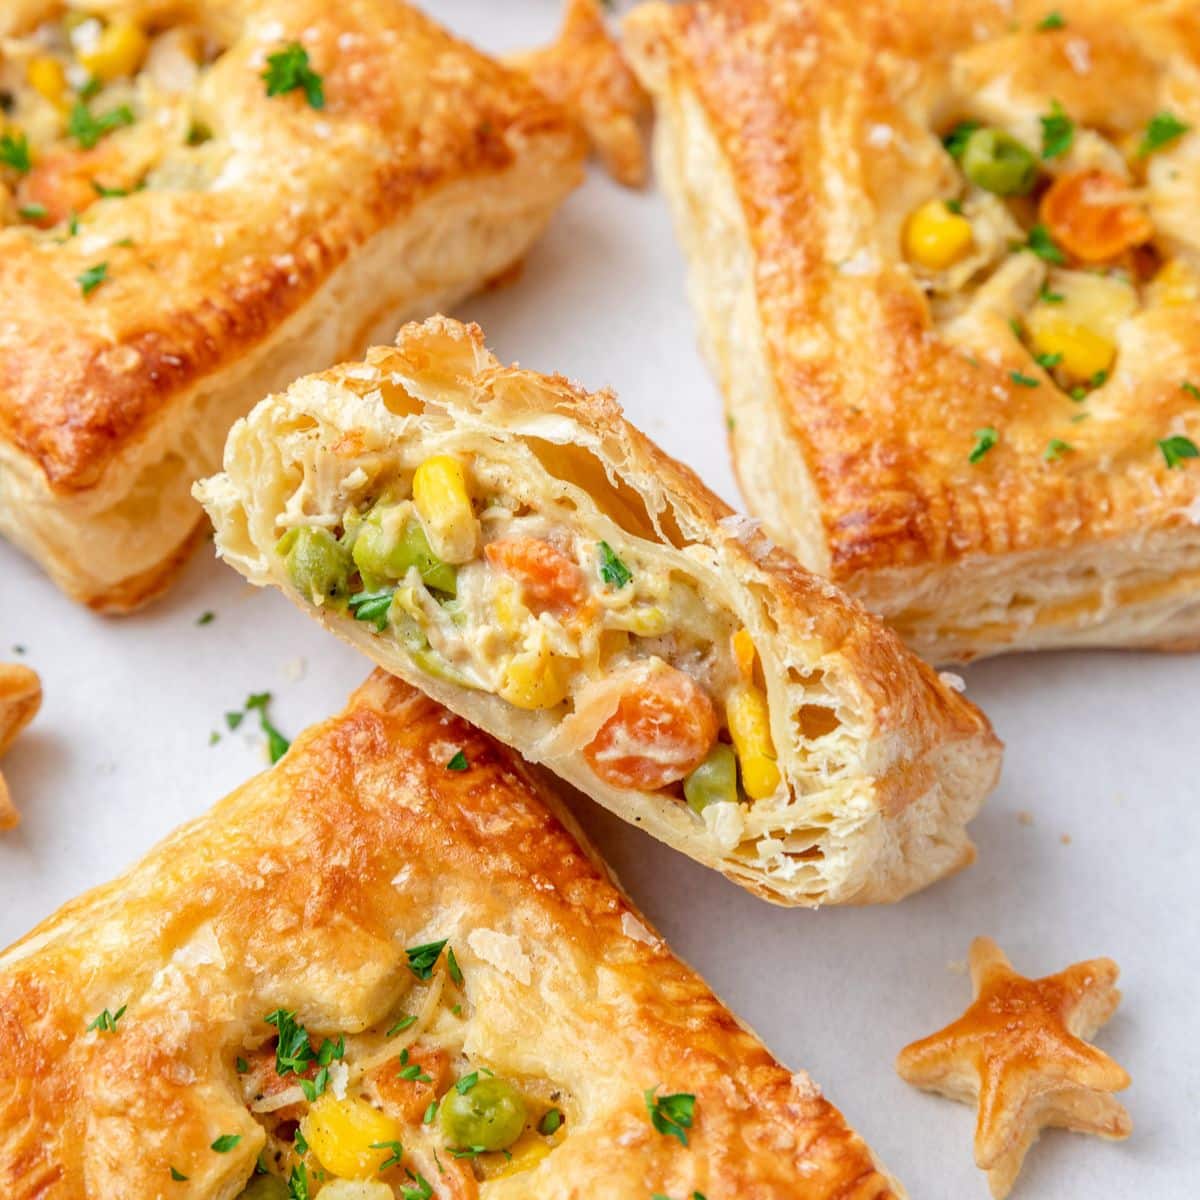 Puff Pastry